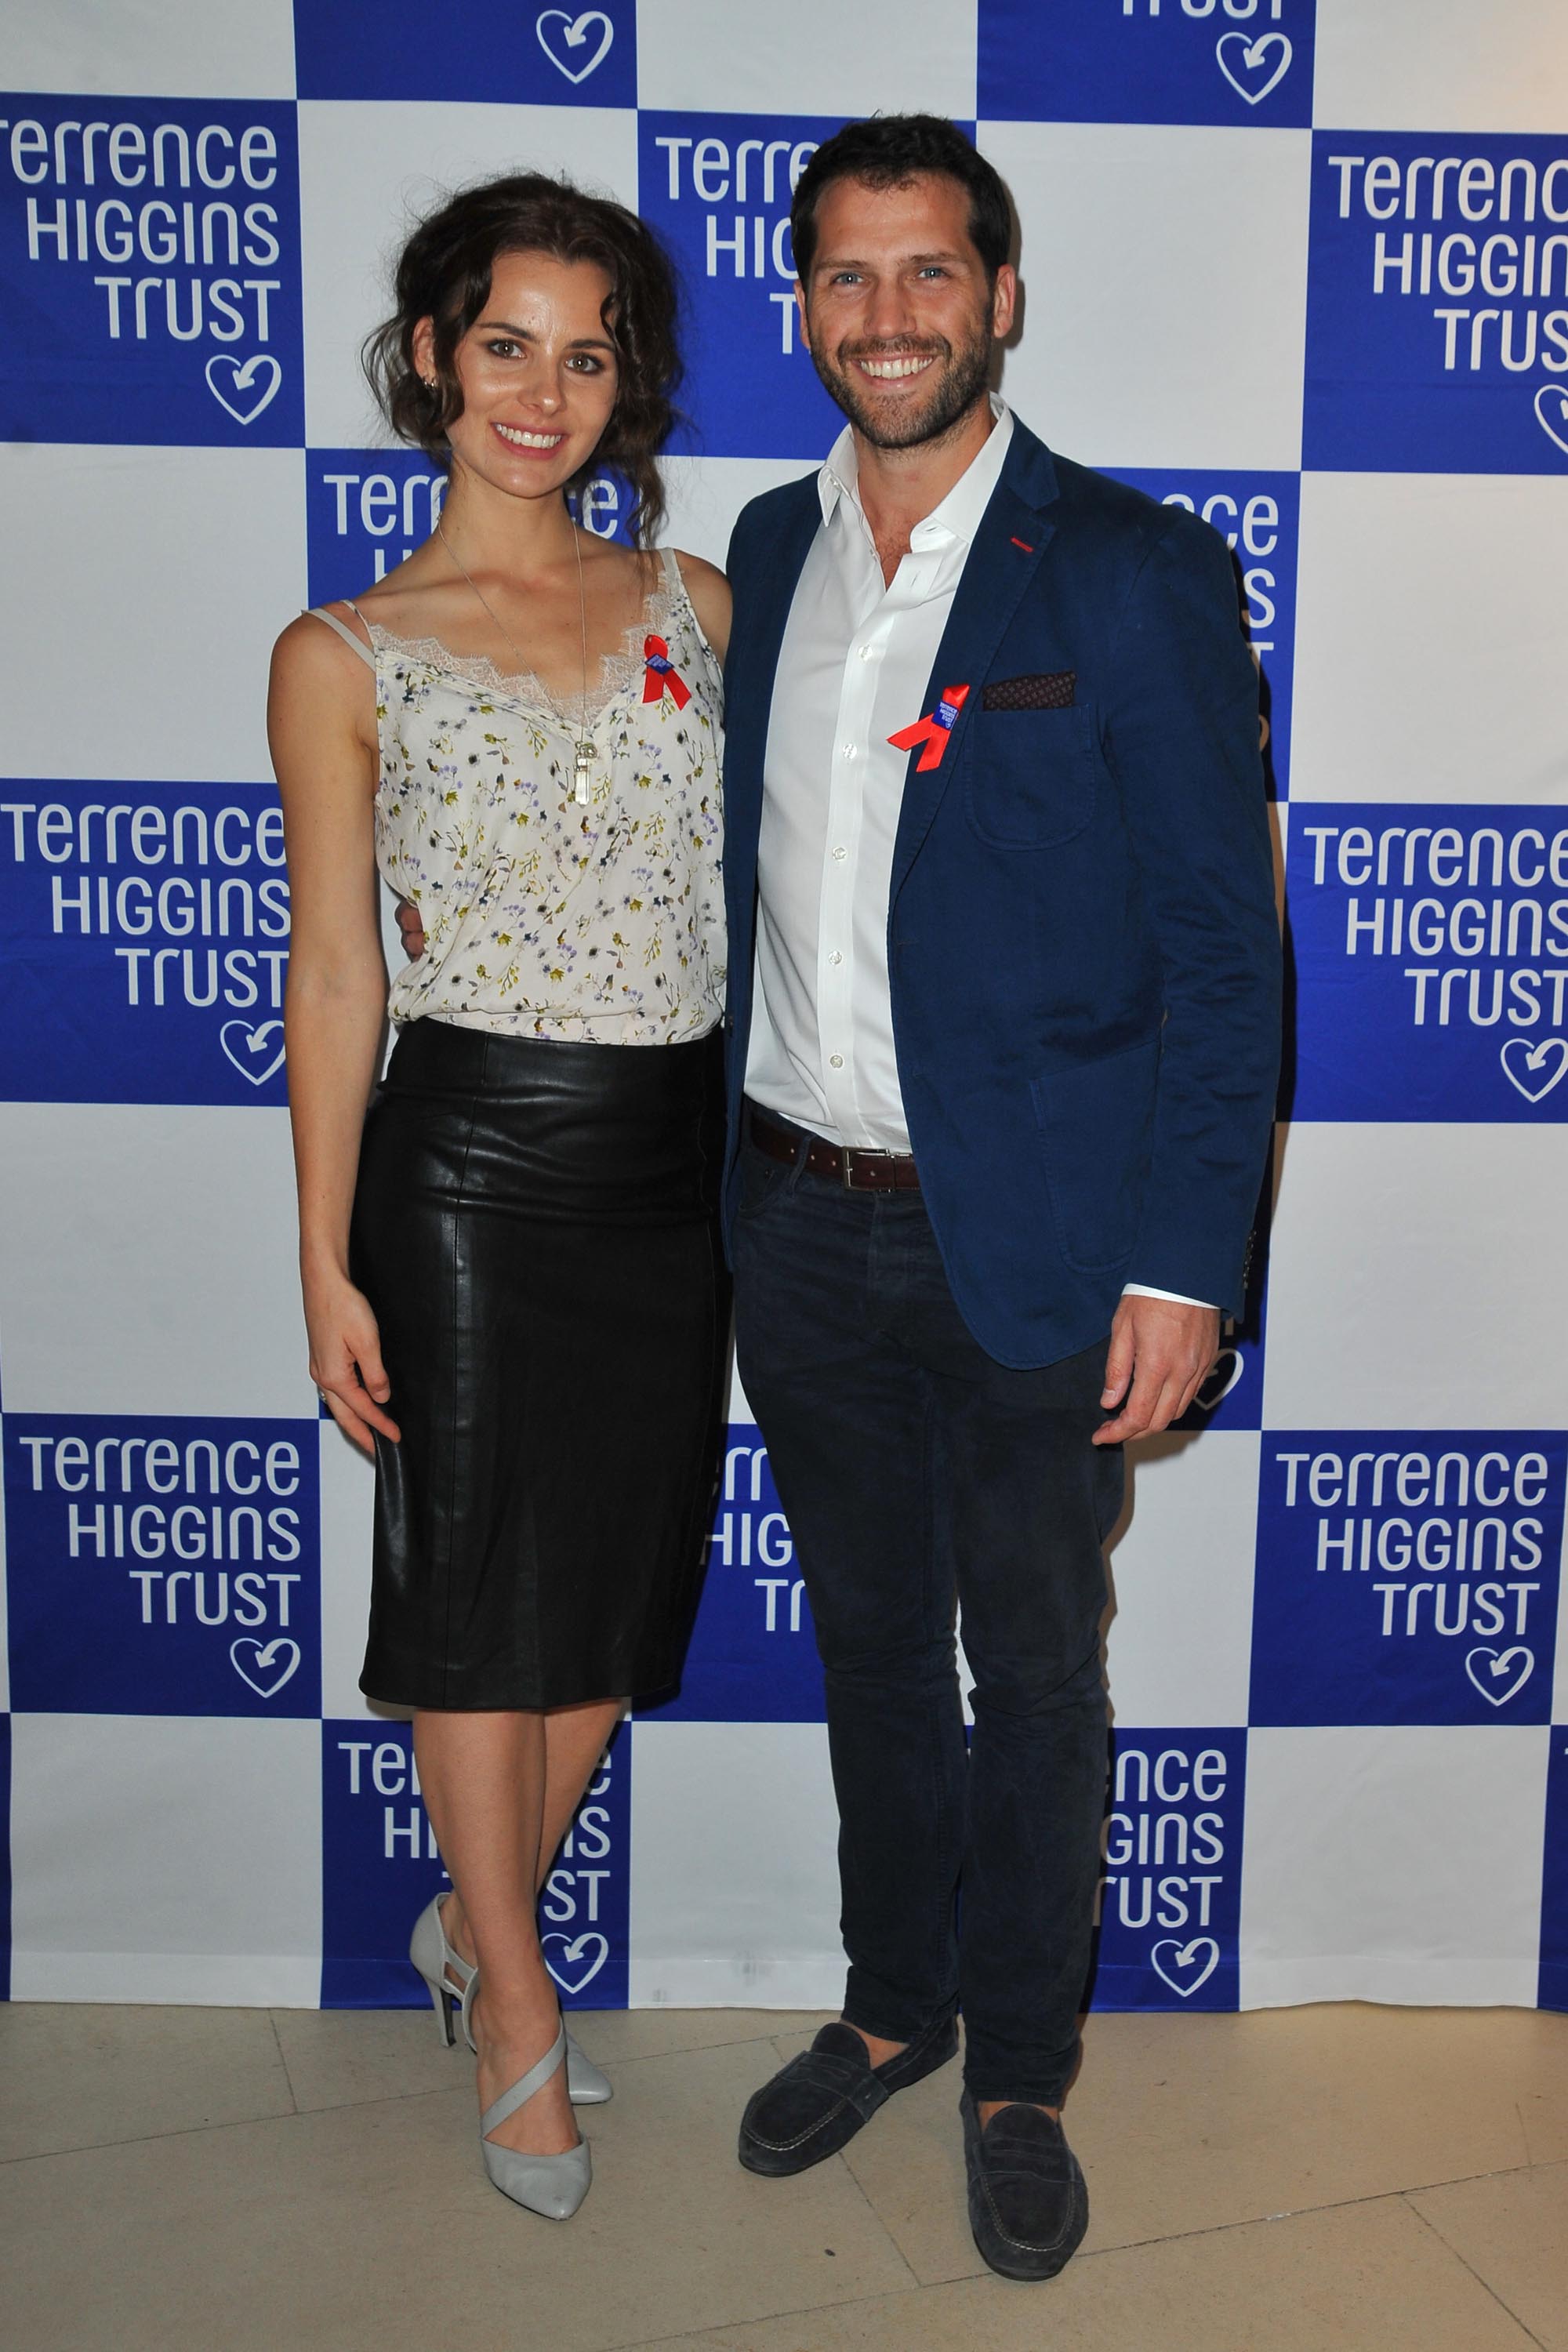 Olivia Chenery attends Terence Higgins Trust